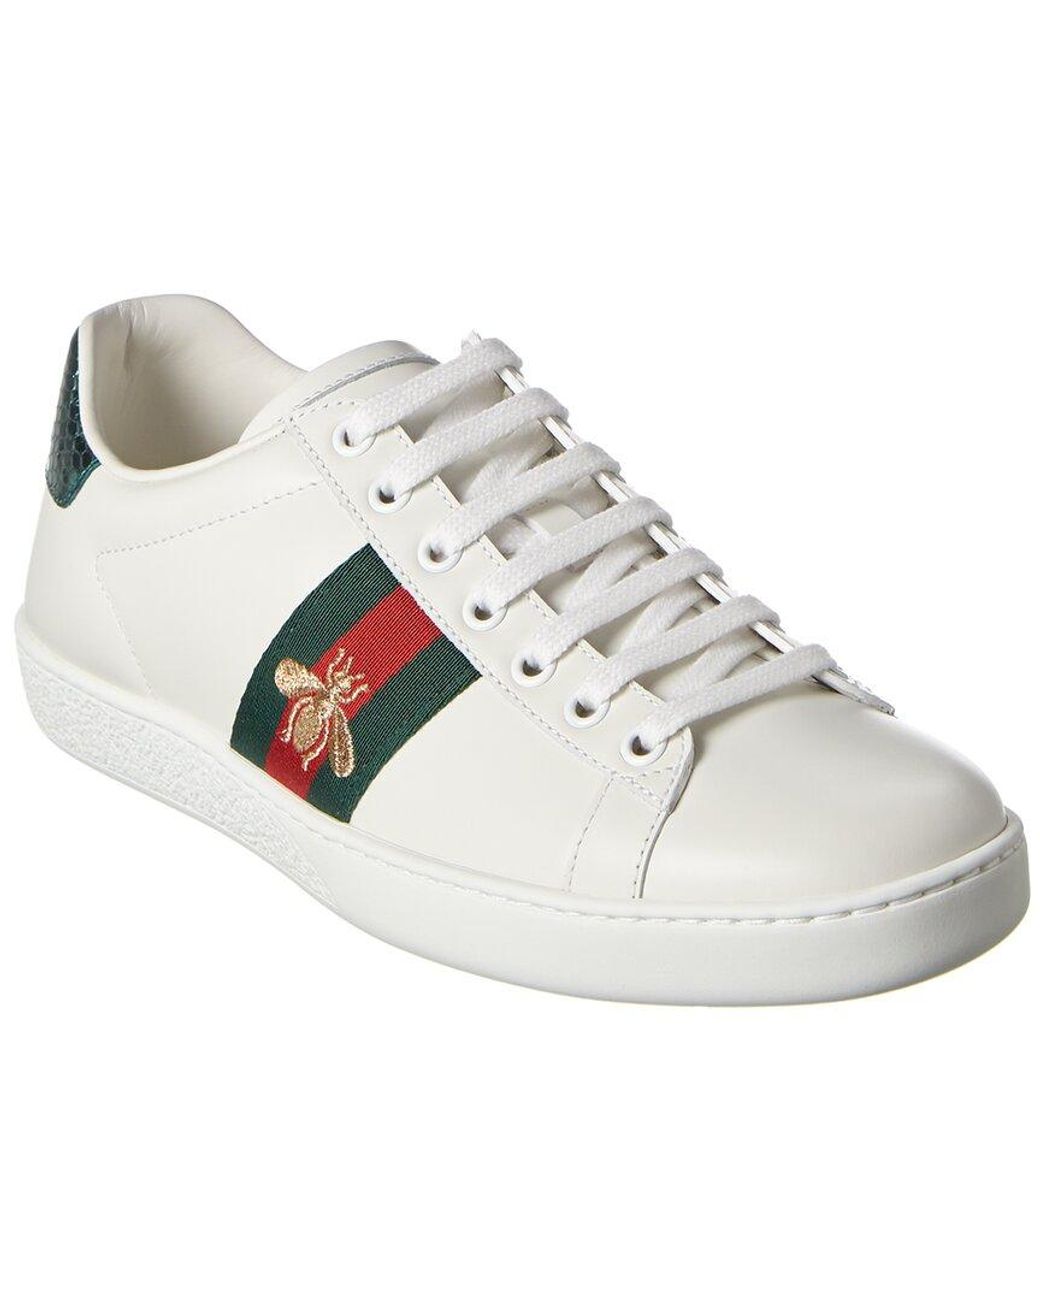 Gucci Ace Embroidered Leather Sneaker in White | Lyst